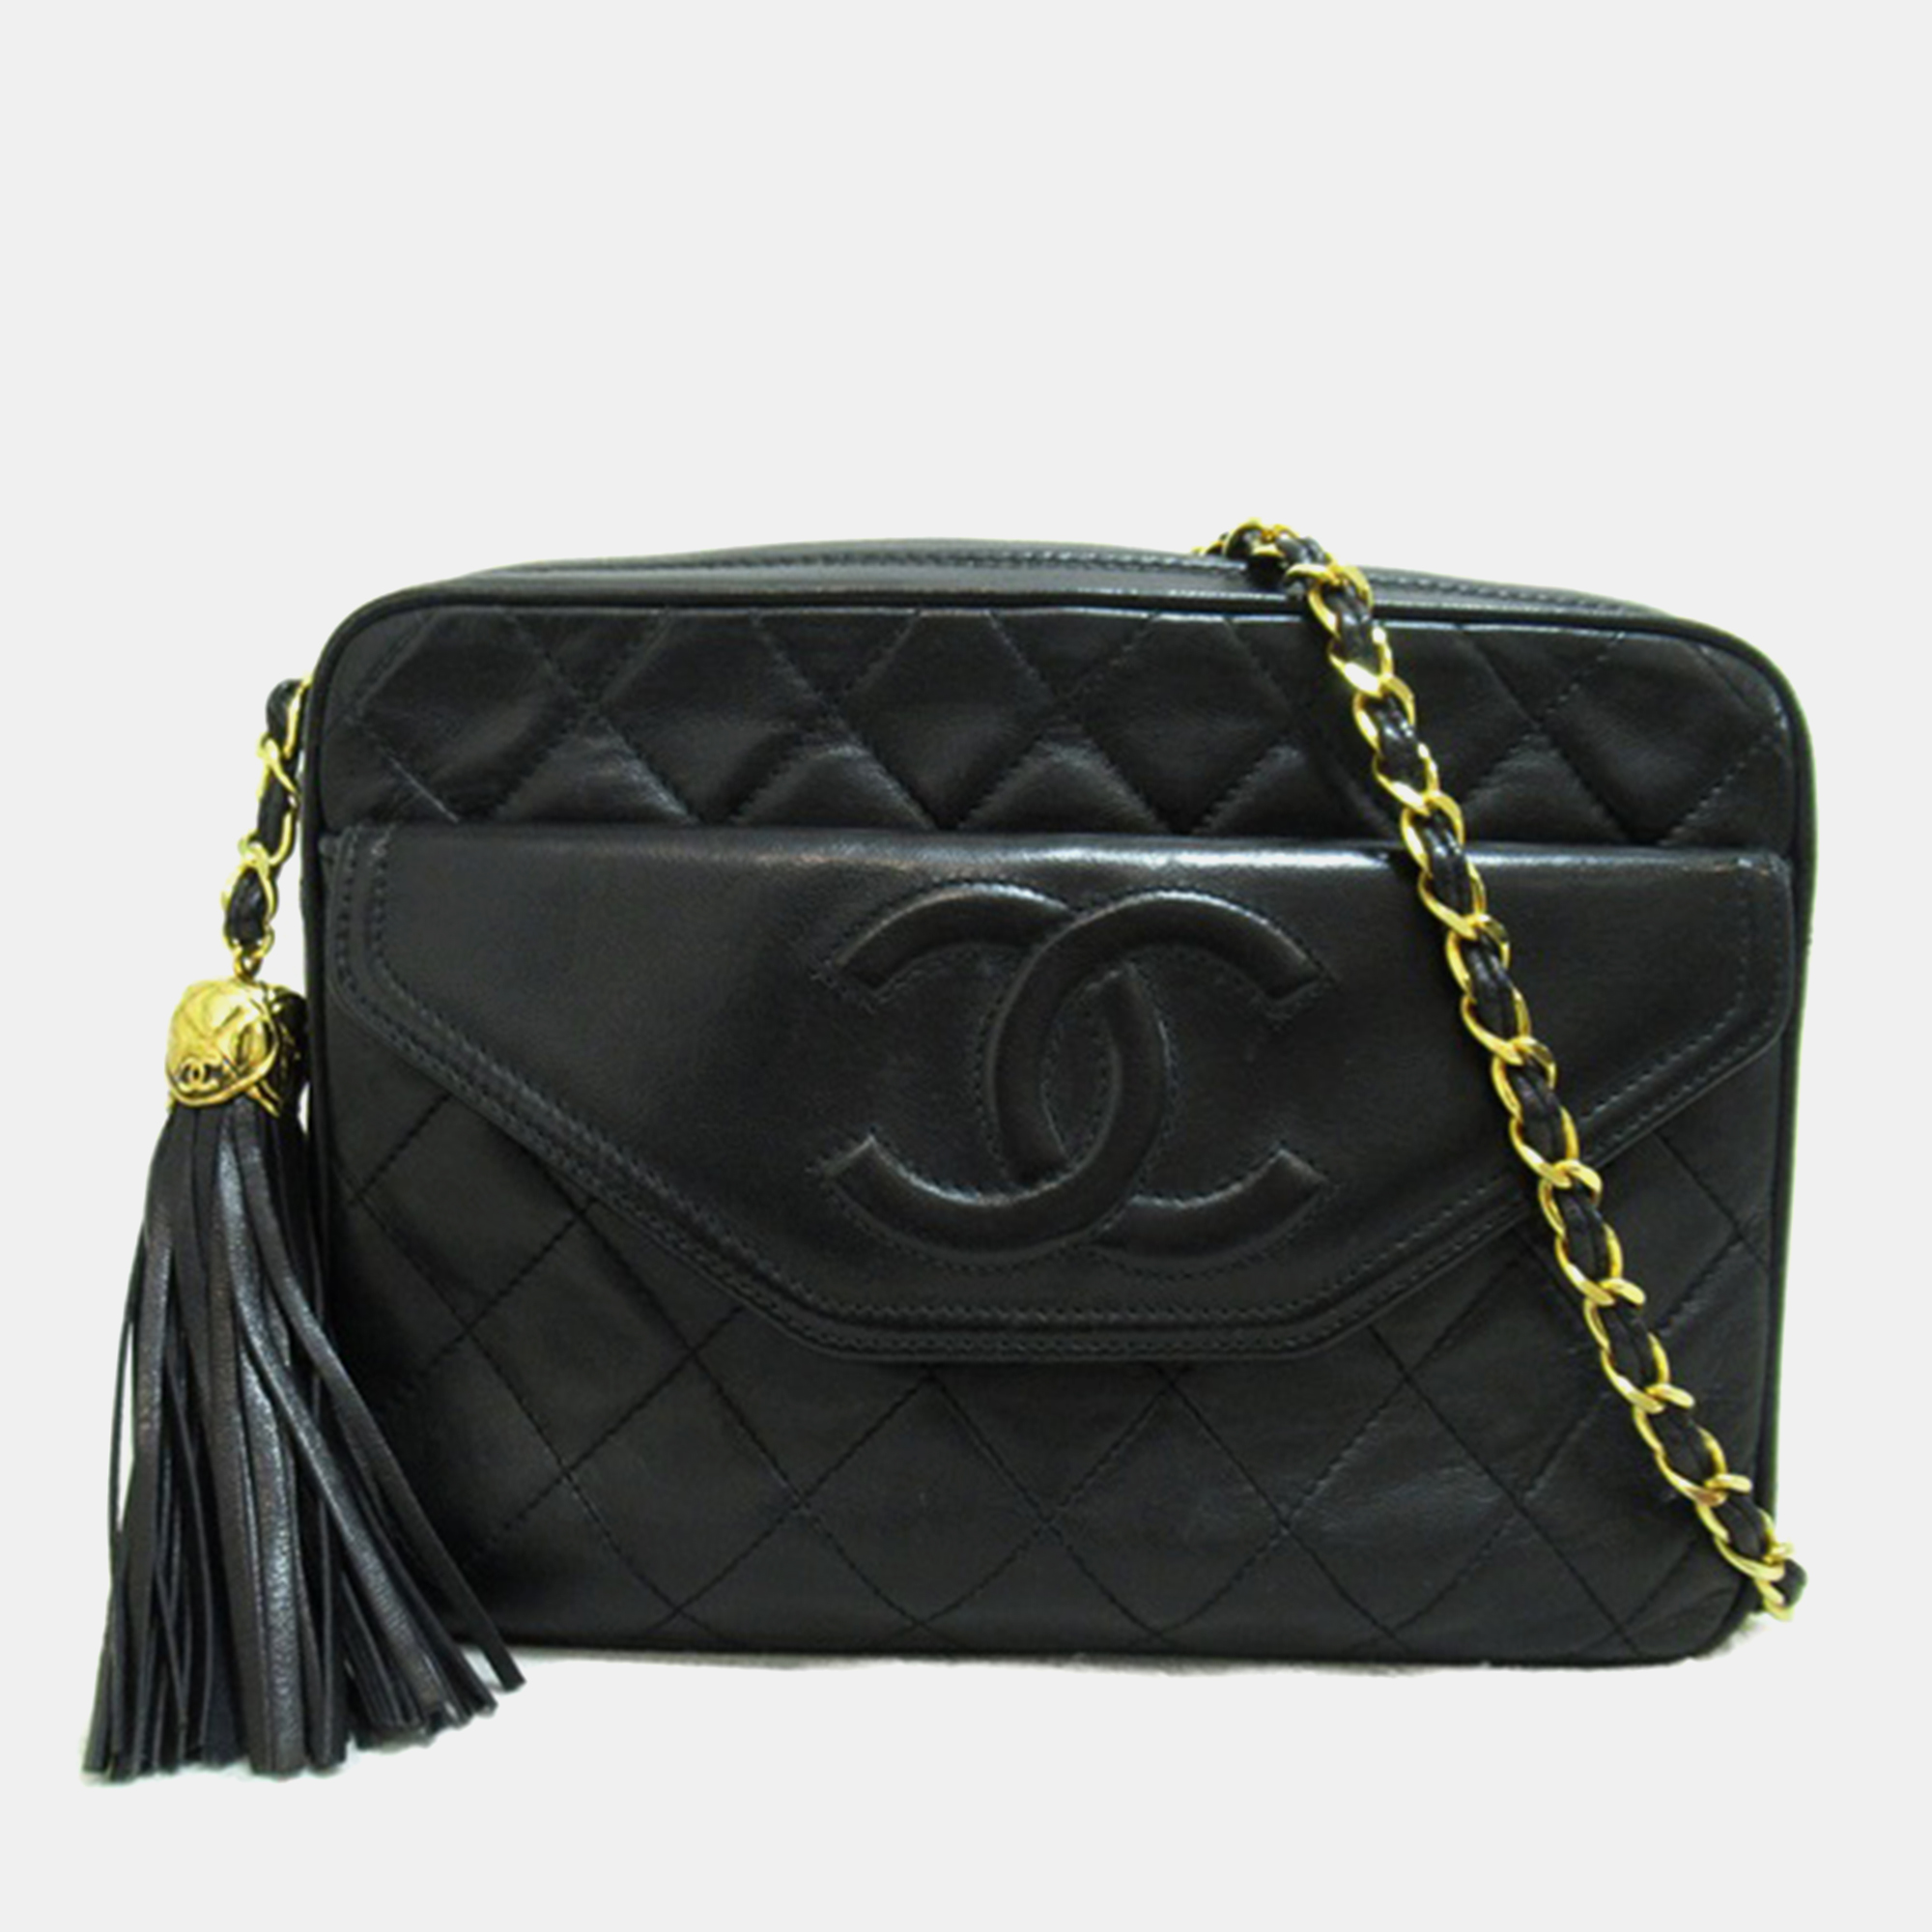 Chanel black leather quilted cc camera bag